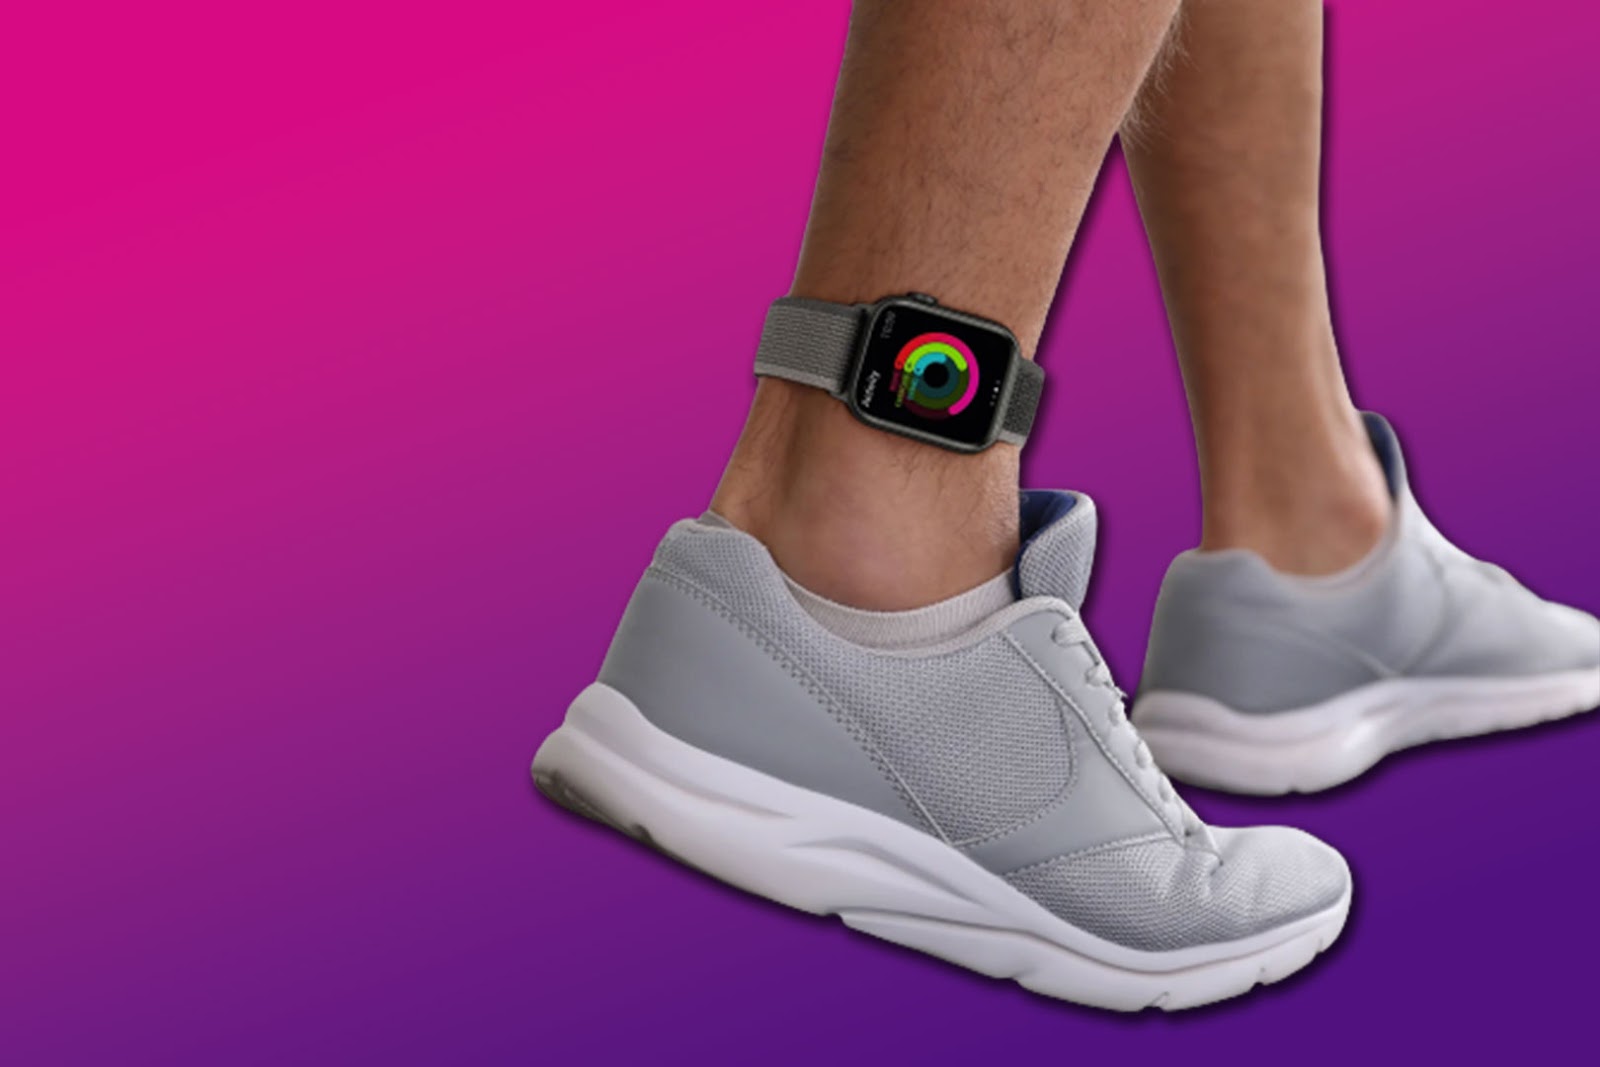 Is Putting Apple Watch on Your Ankle Accurate